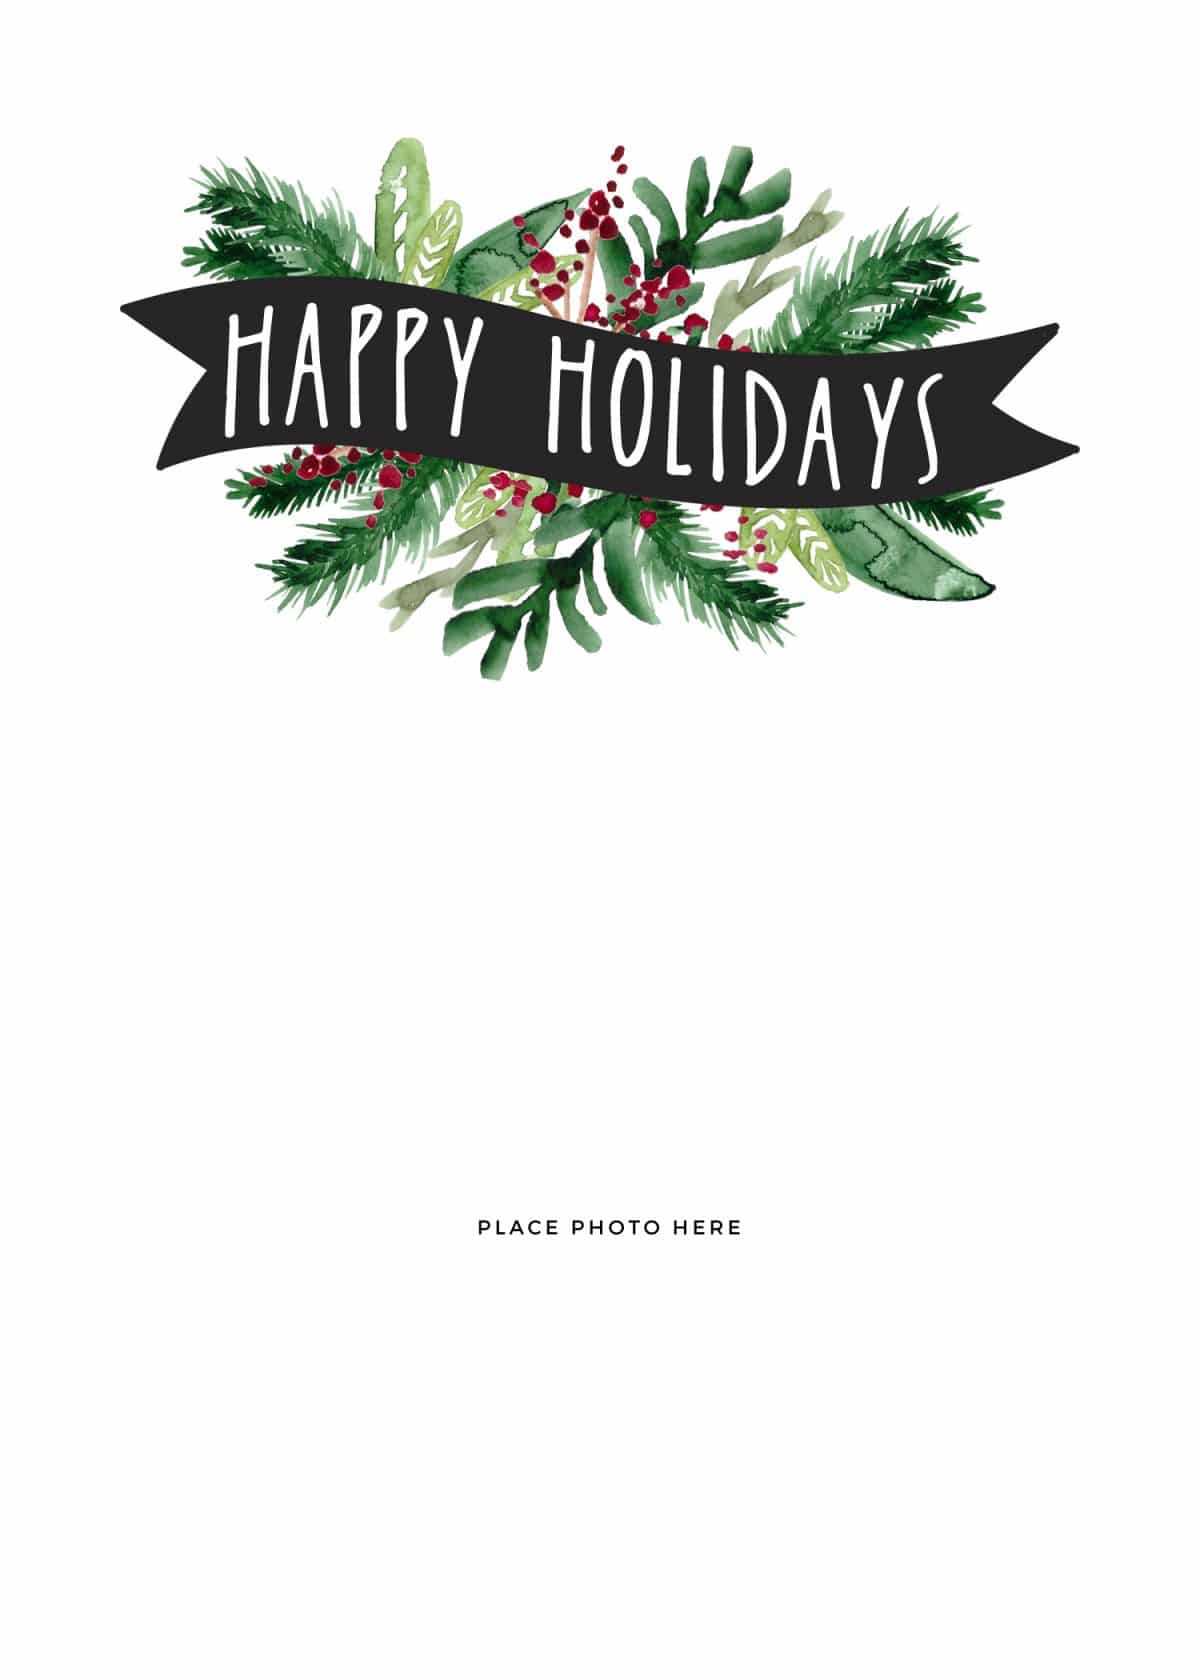 Make Your Own Photo Christmas Cards (For Free!) – Somewhat In Christmas Photo Cards Templates Free Downloads